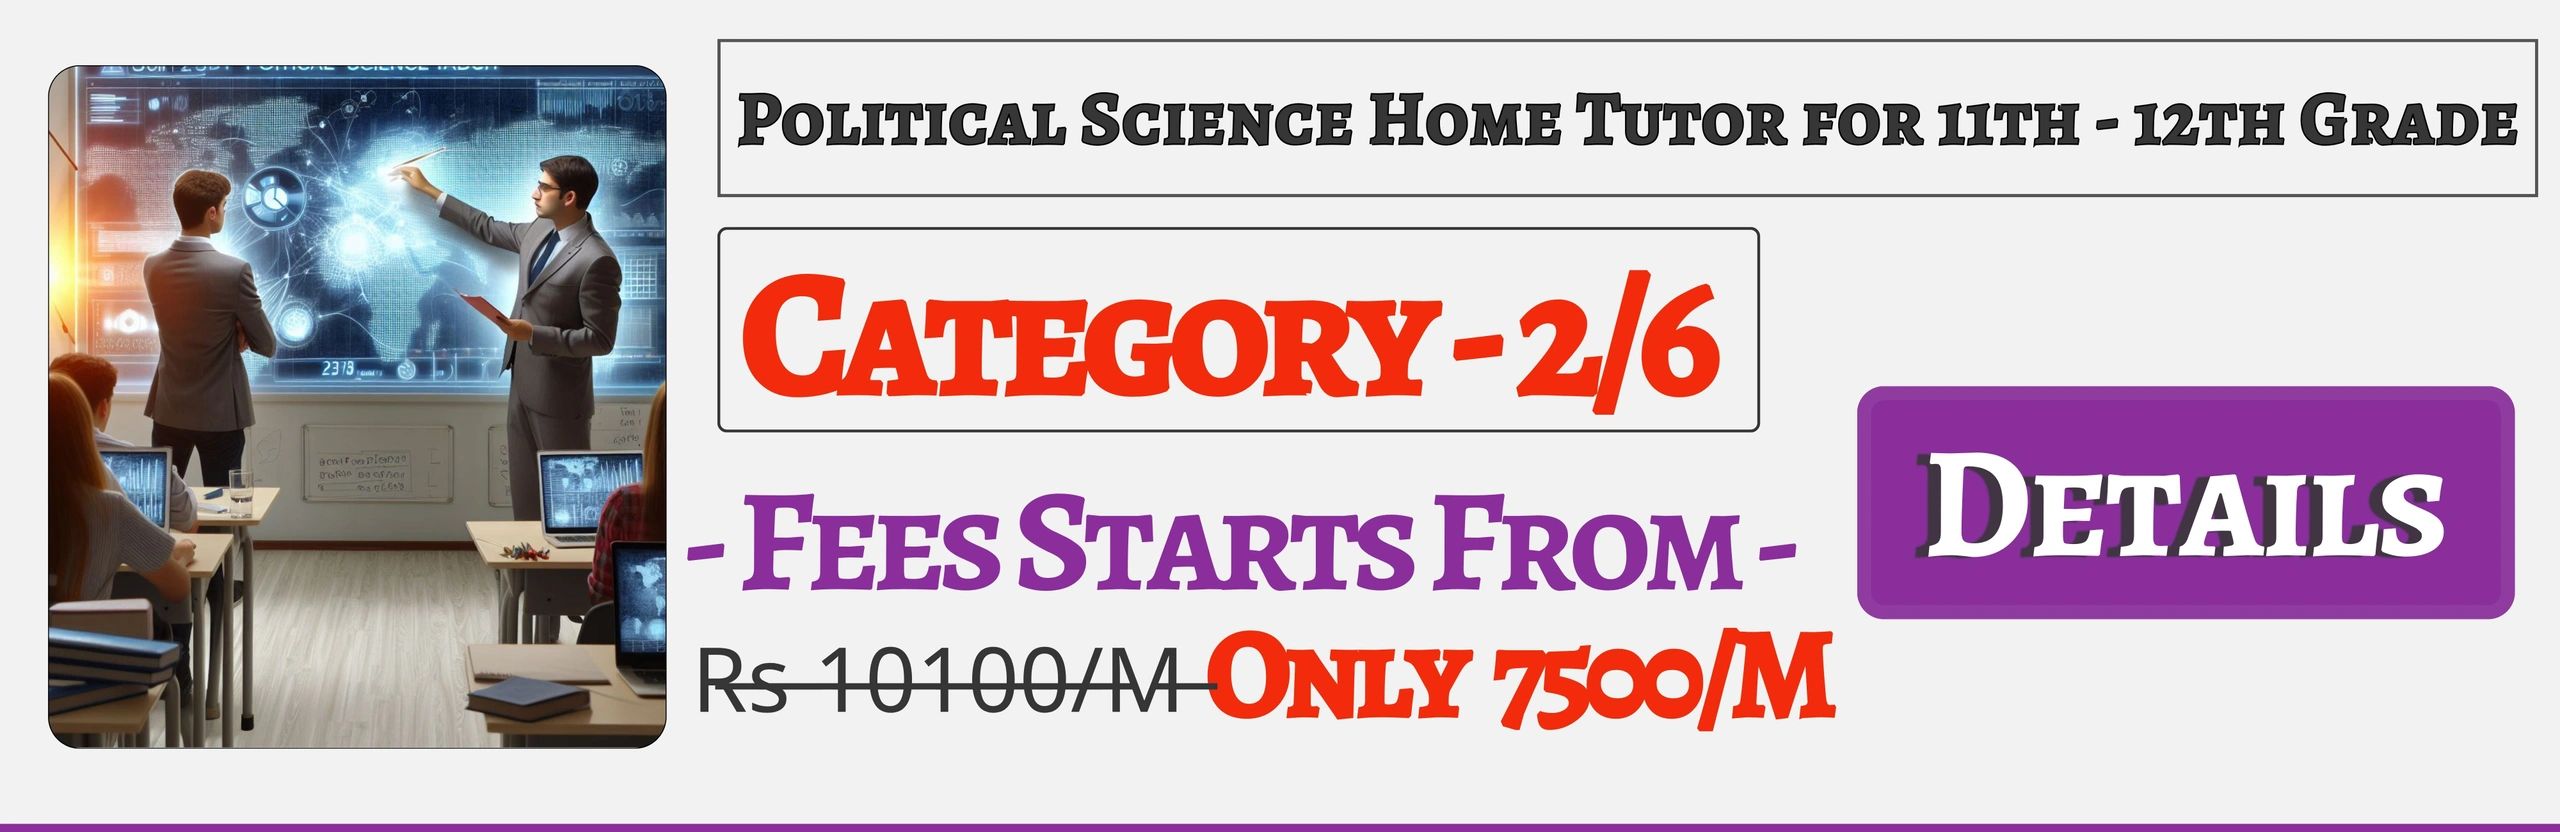 Book Best Nearby Political Science Home Tuition Tutors For 11th & 12th In Jaipur , Fees Only 7500/M